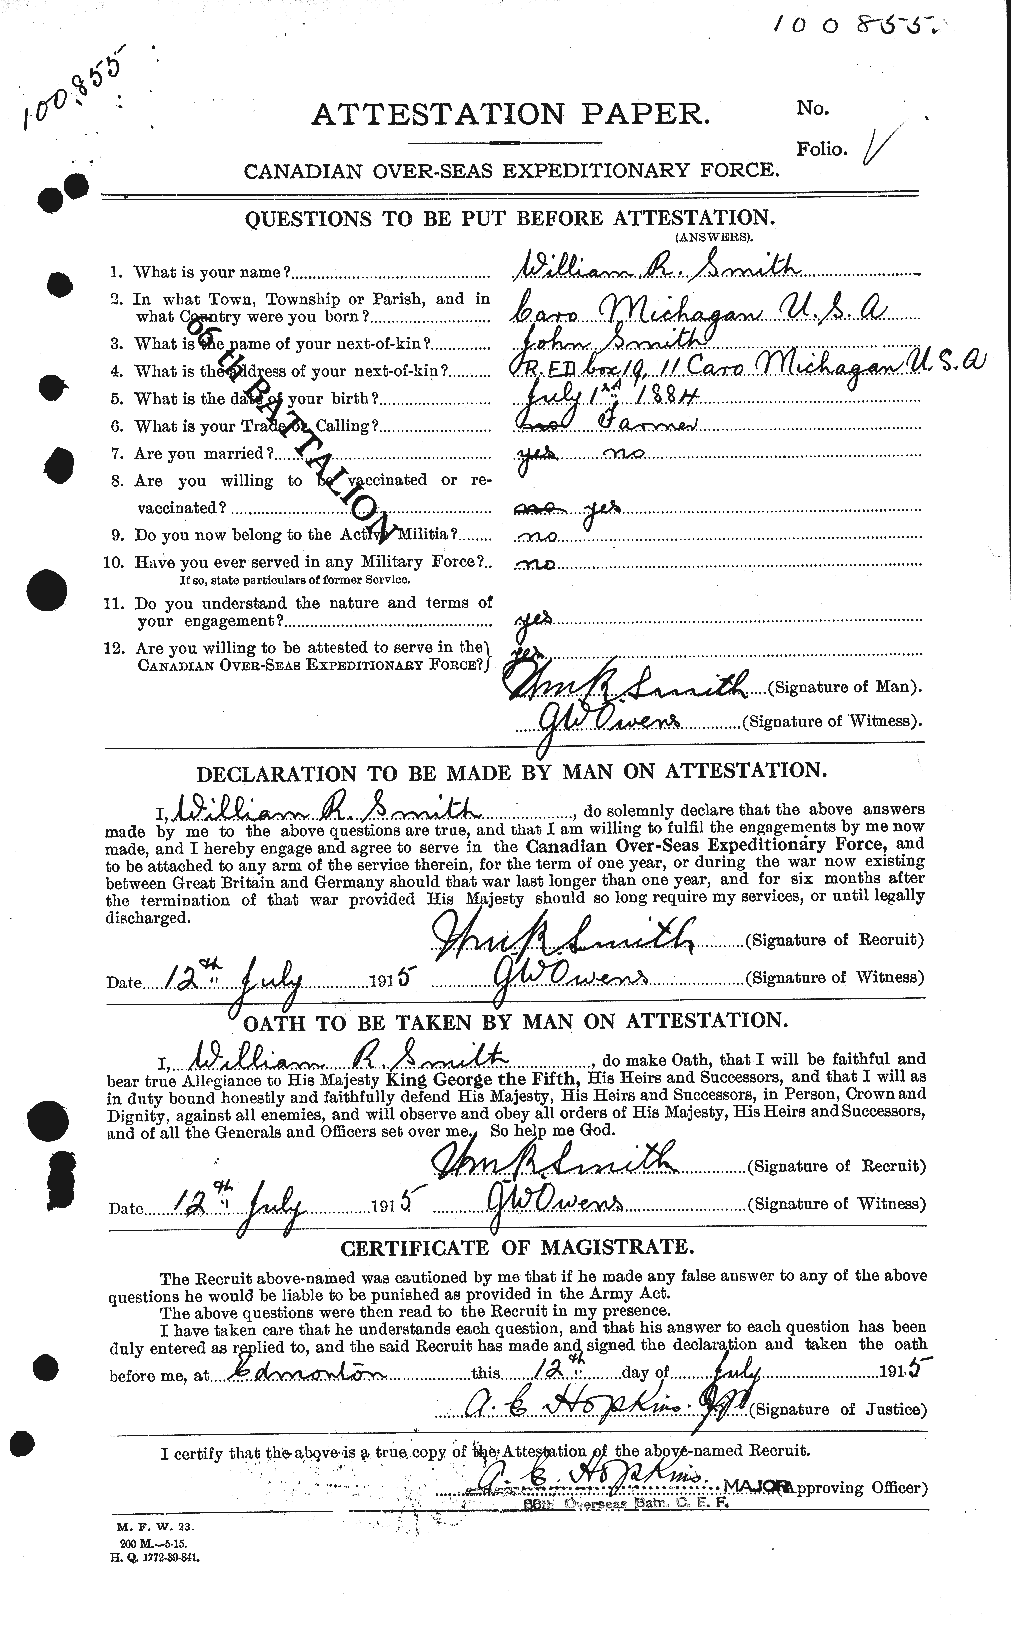 Personnel Records of the First World War - CEF 108012a